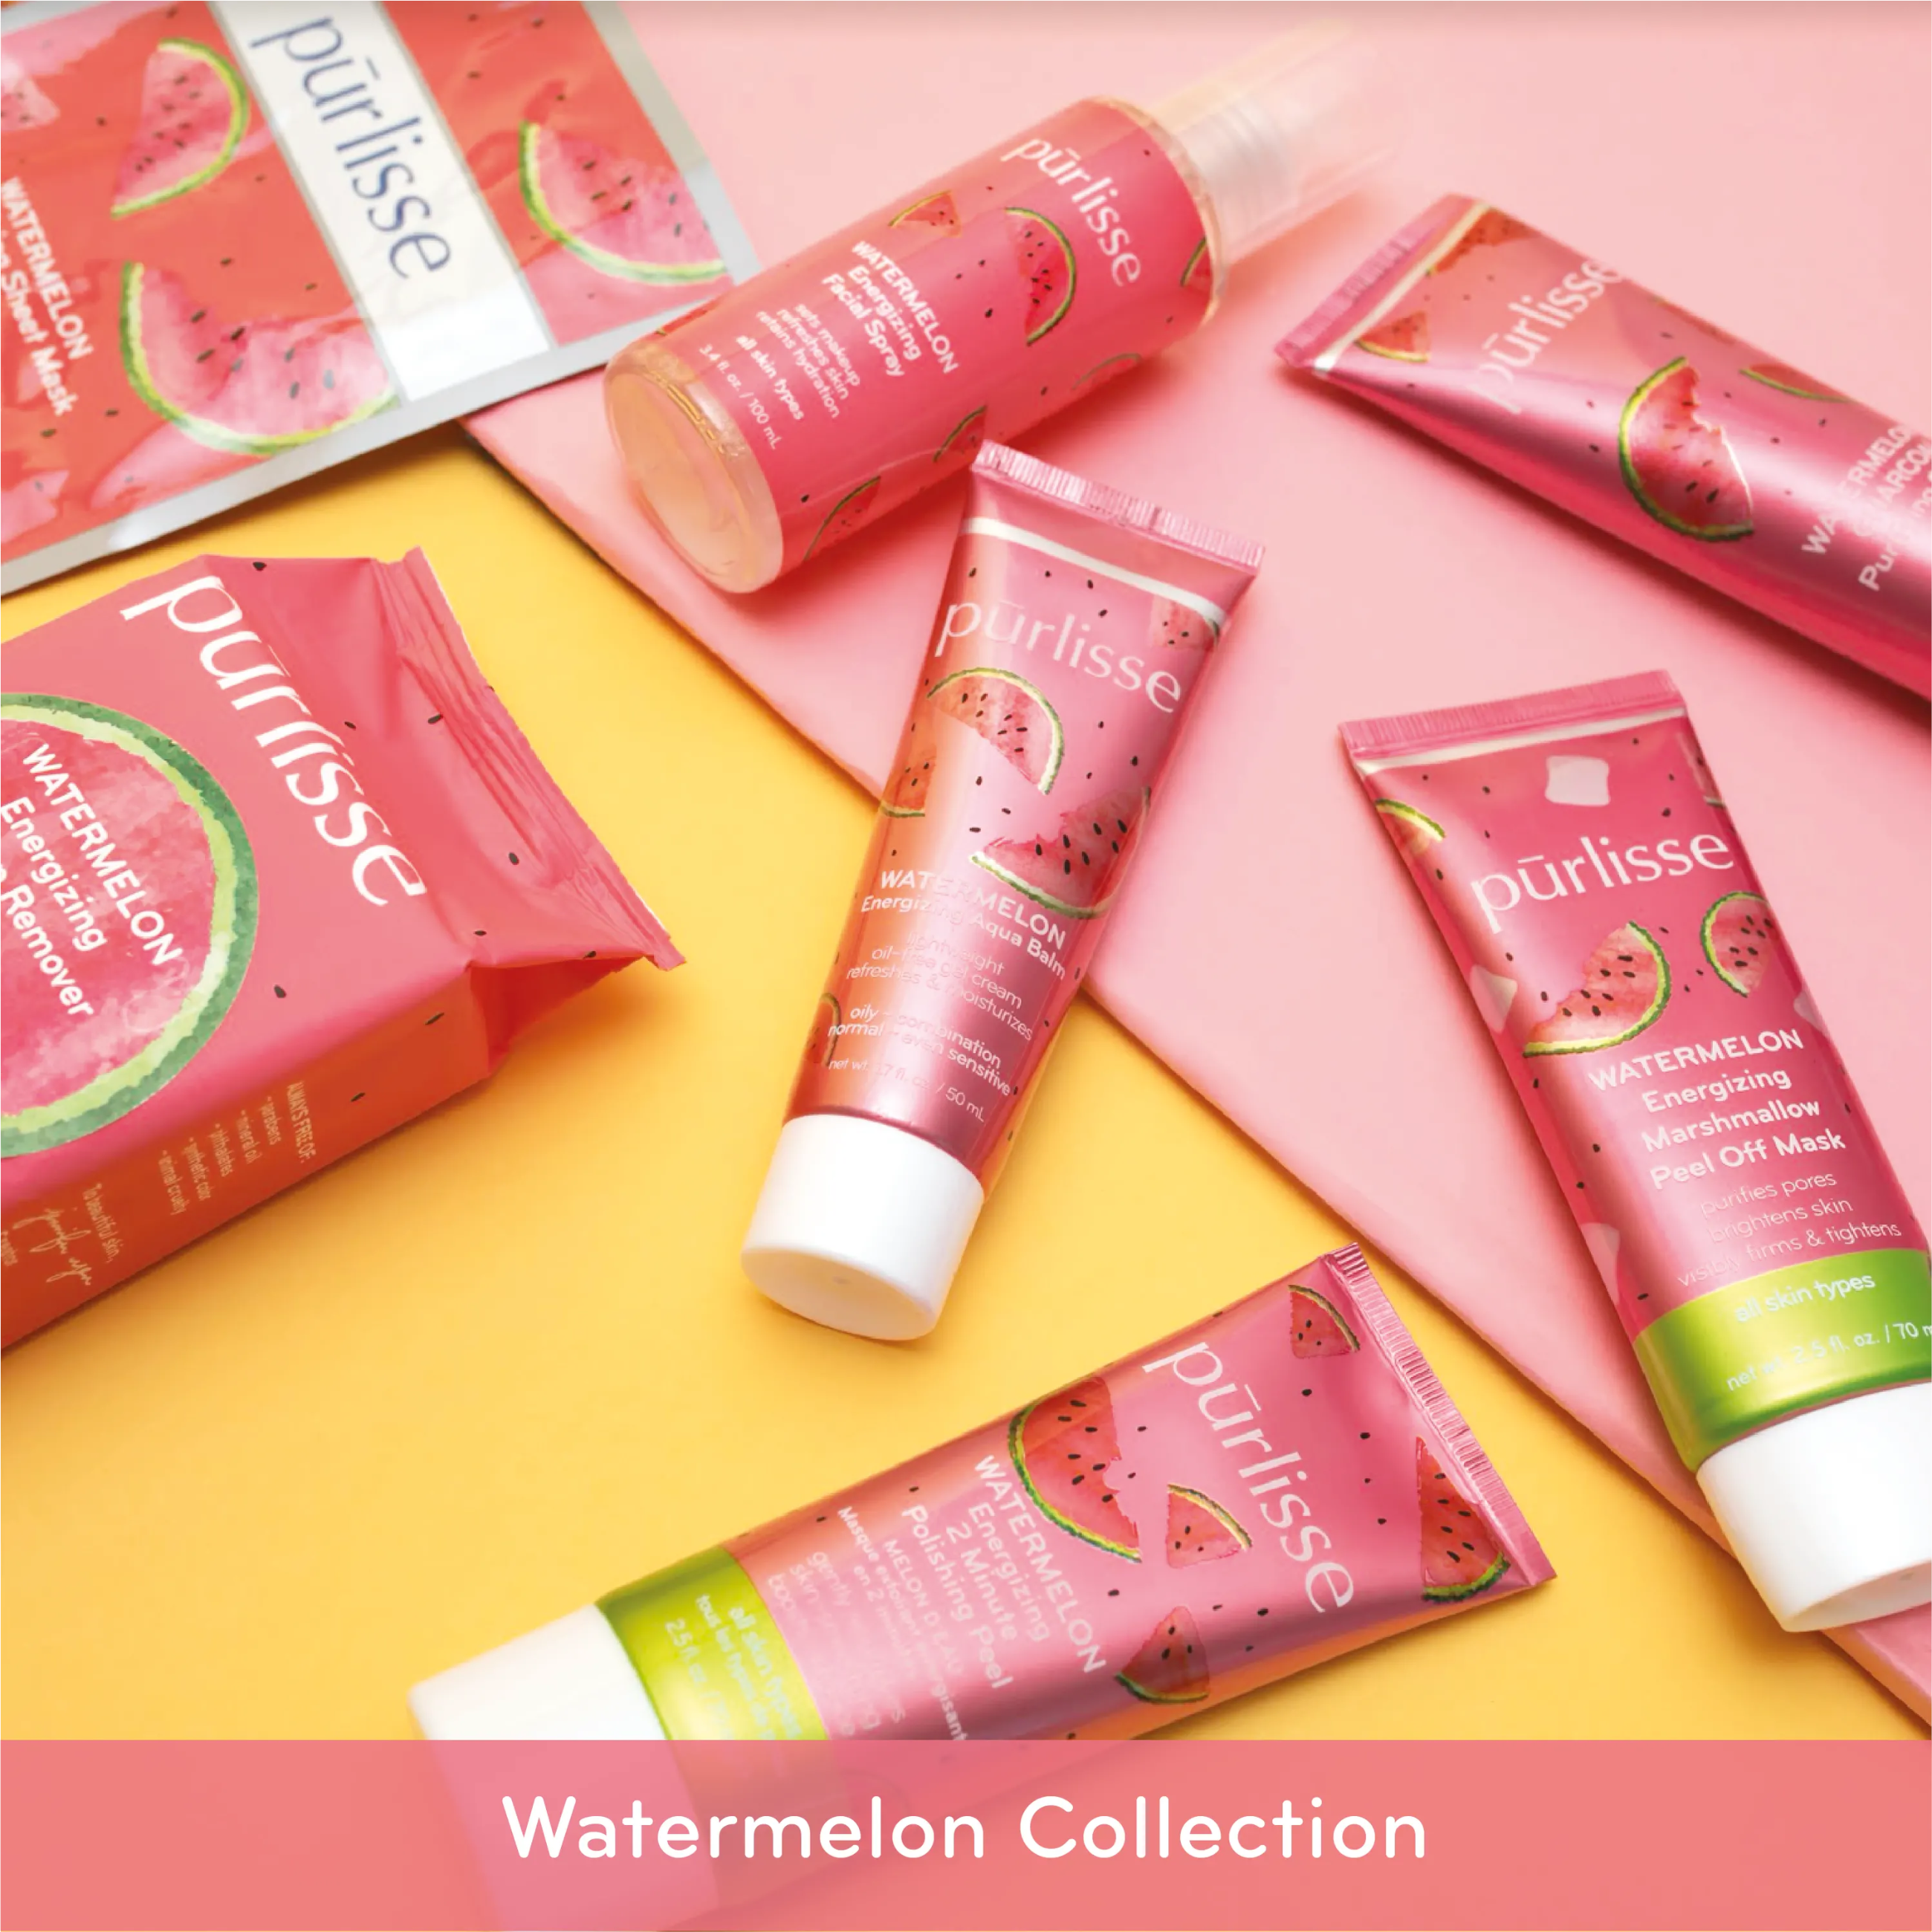 Watermelon Collection